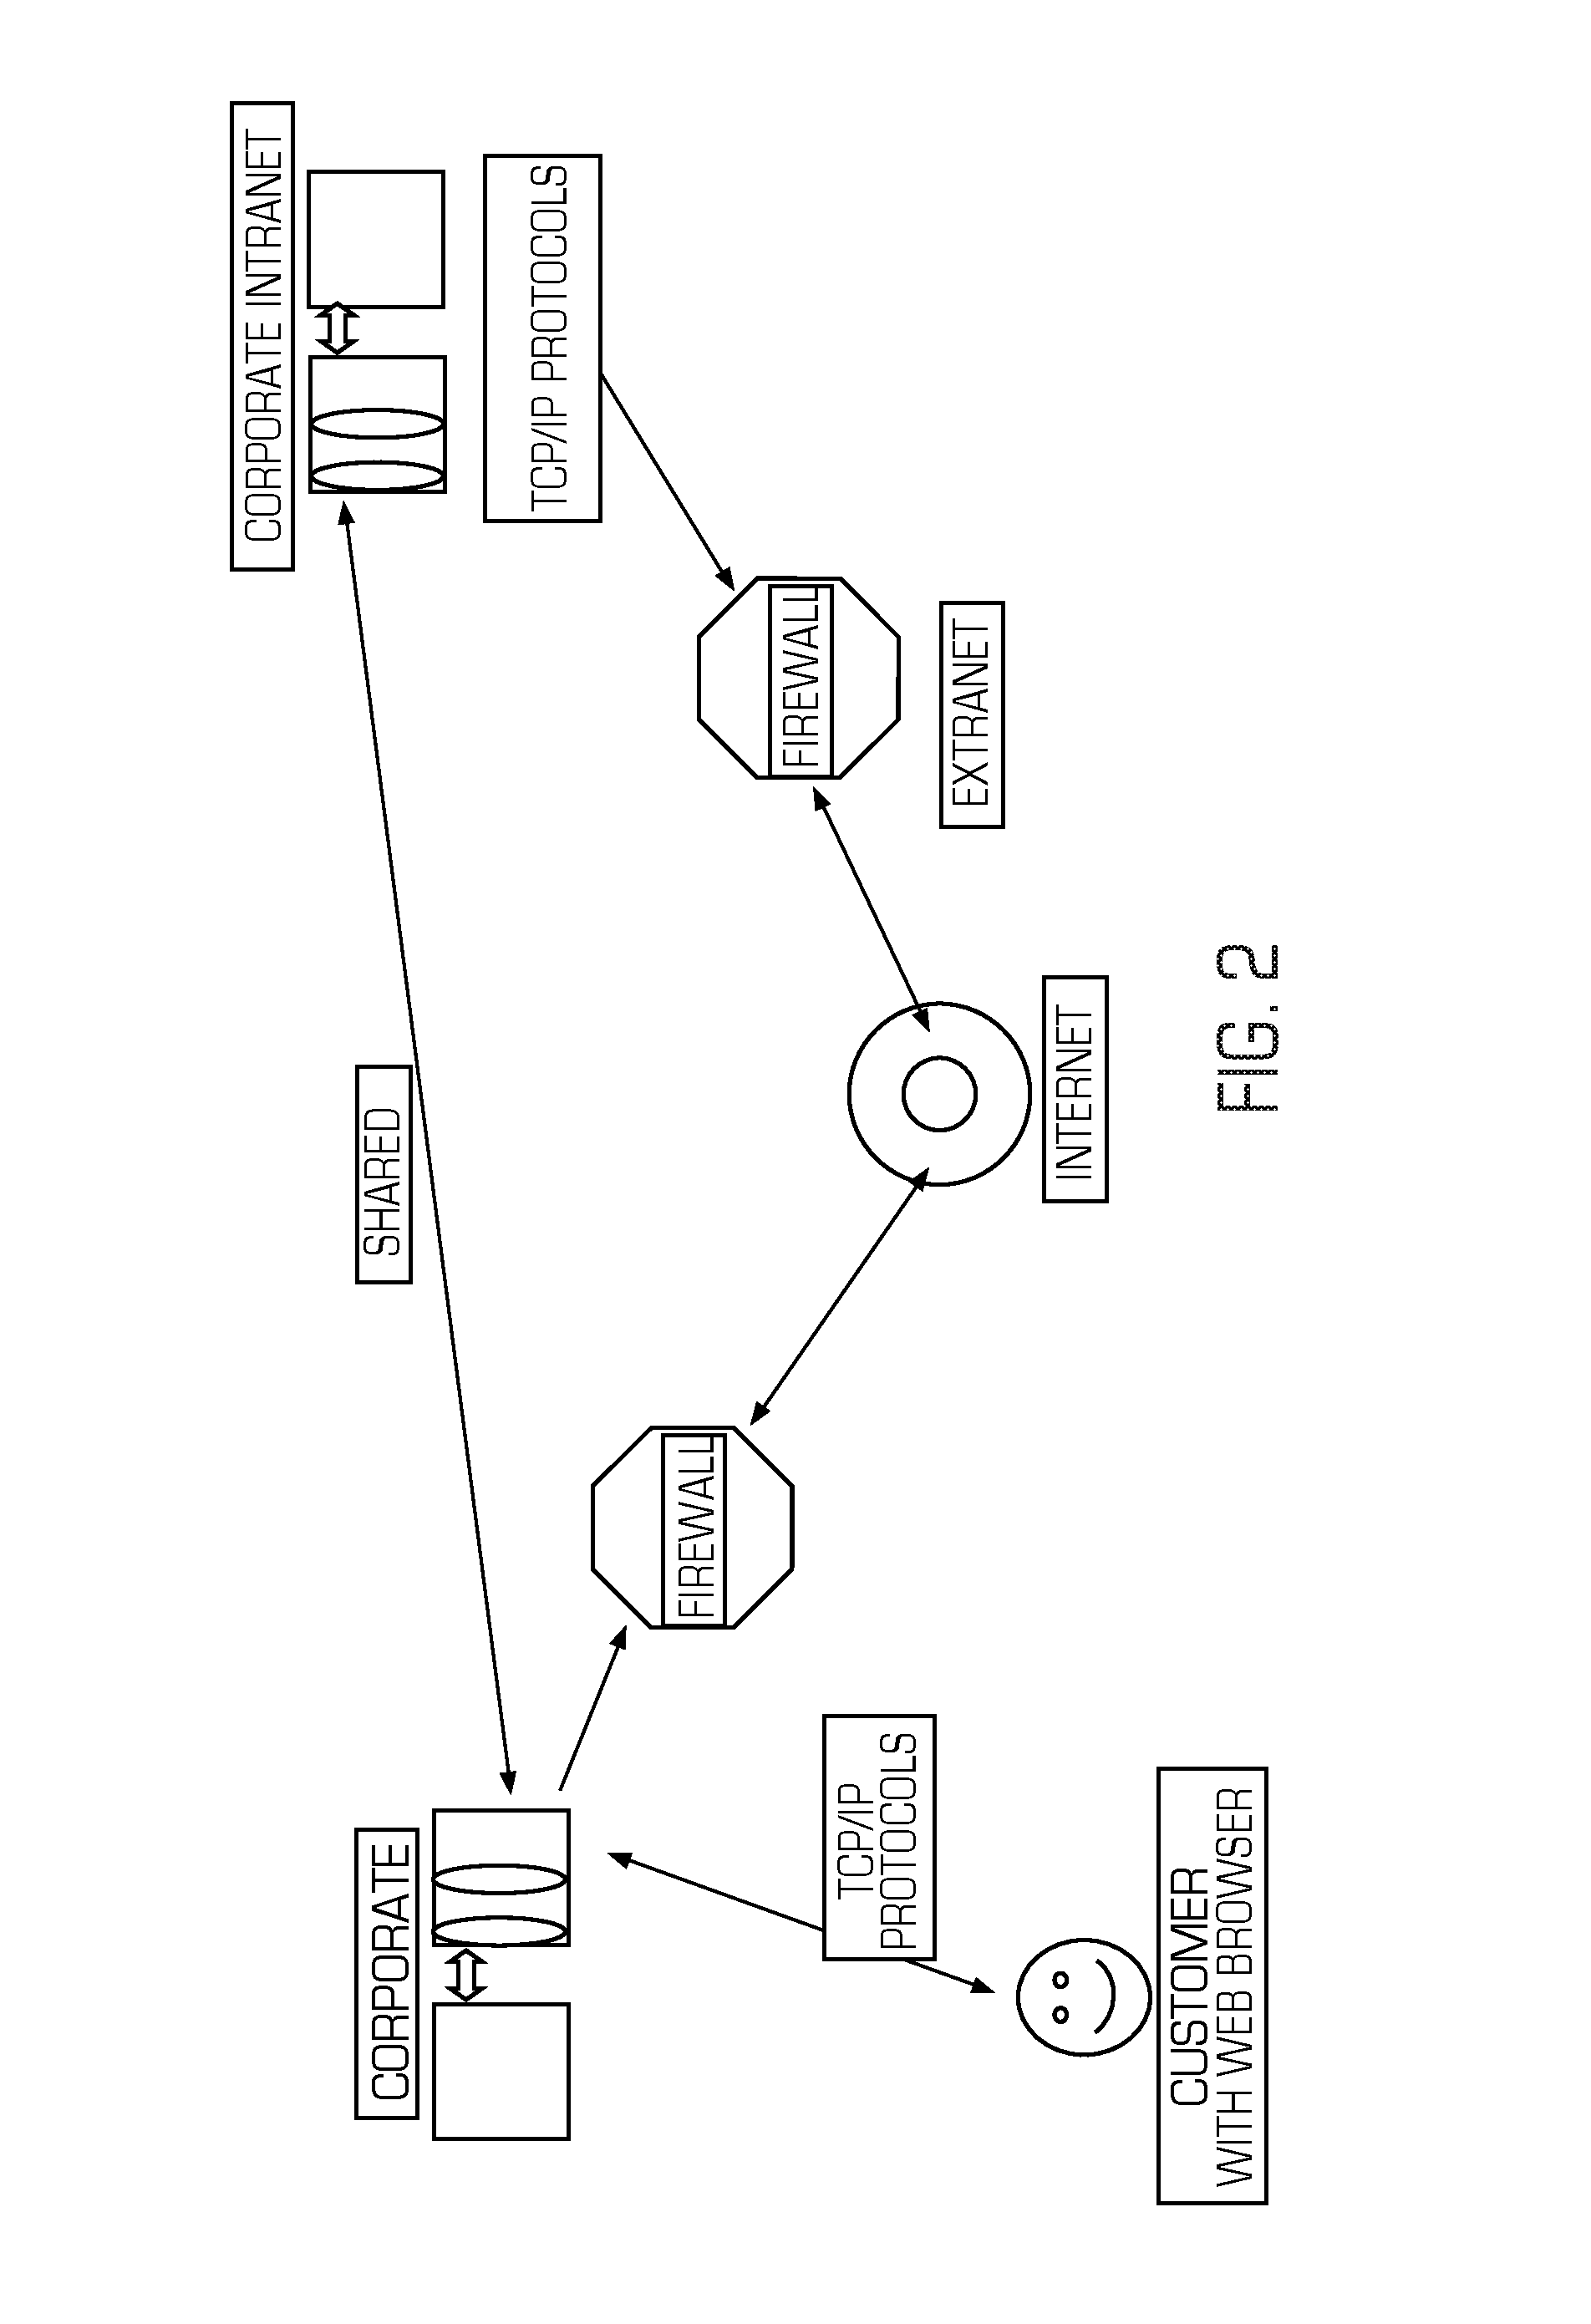 Process and device for conducting electronic transactions